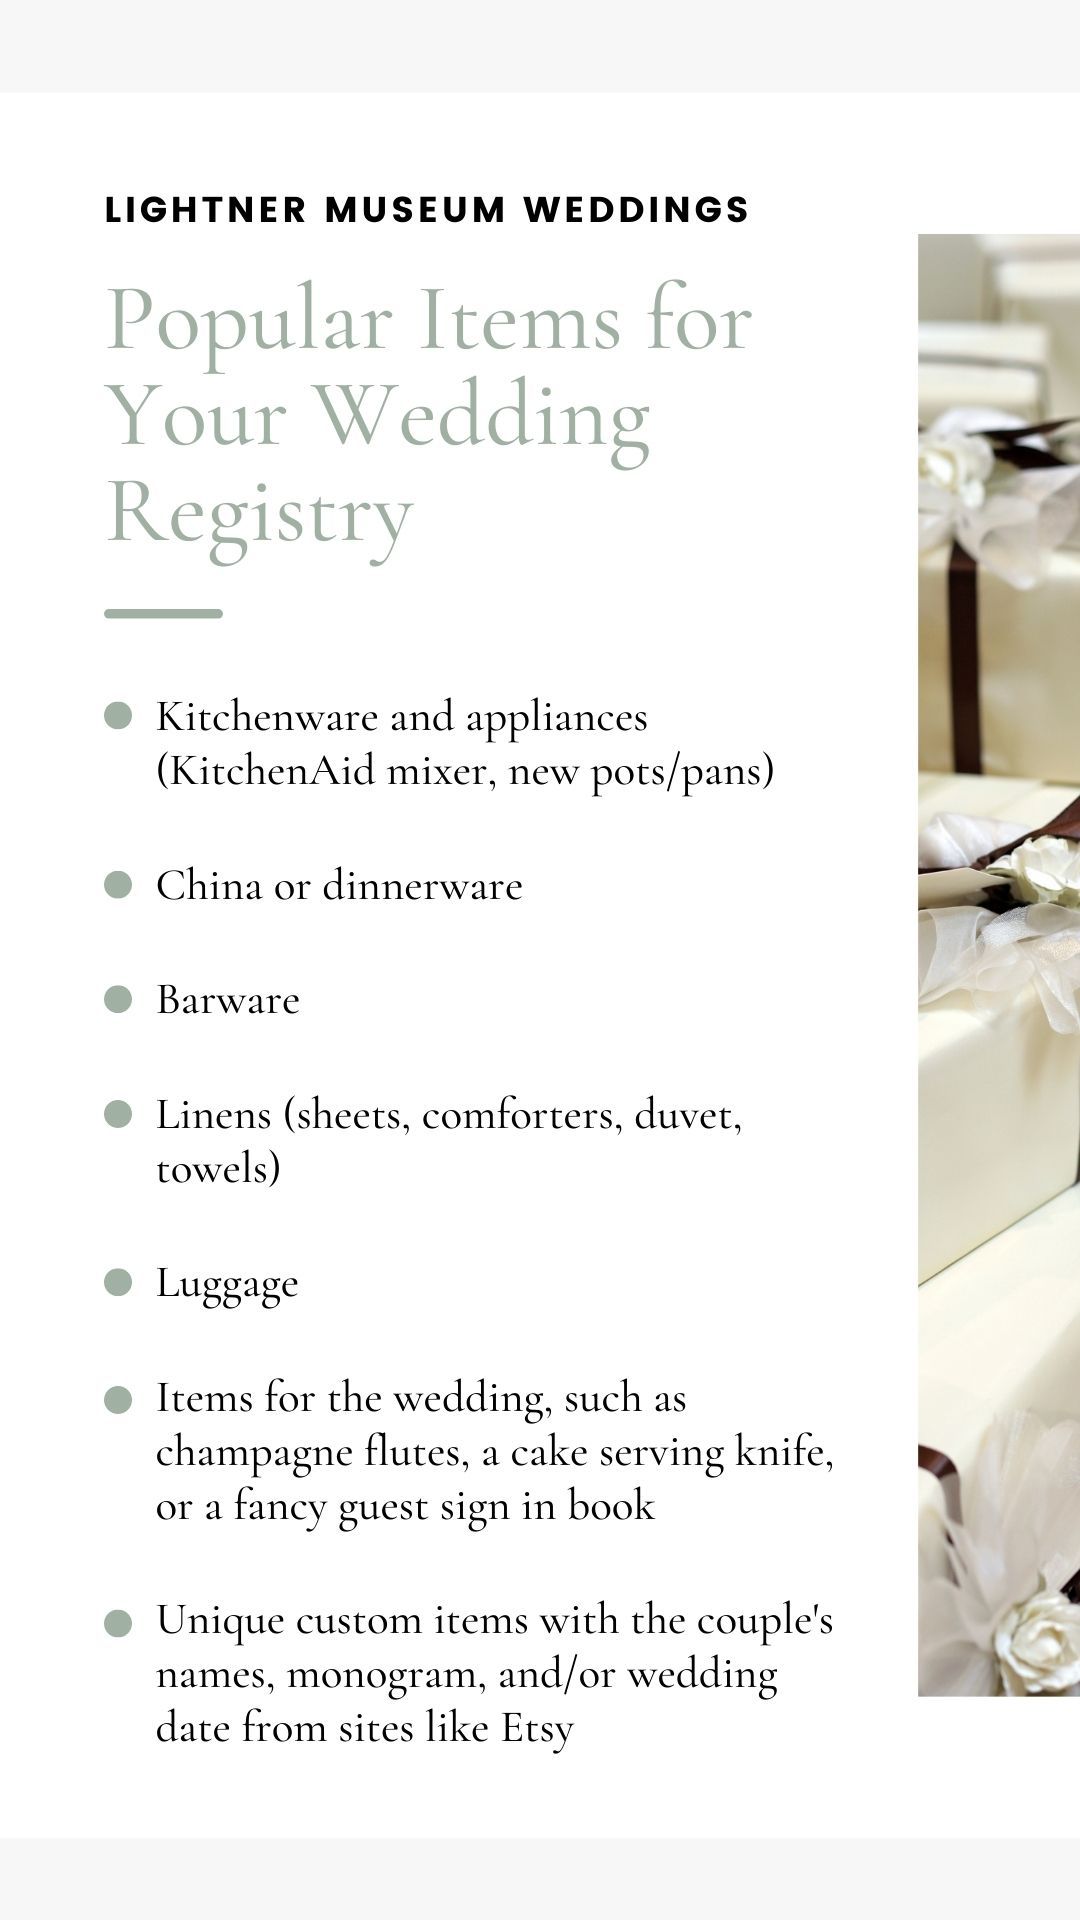 Best places to register for your wedding online - Reviewed